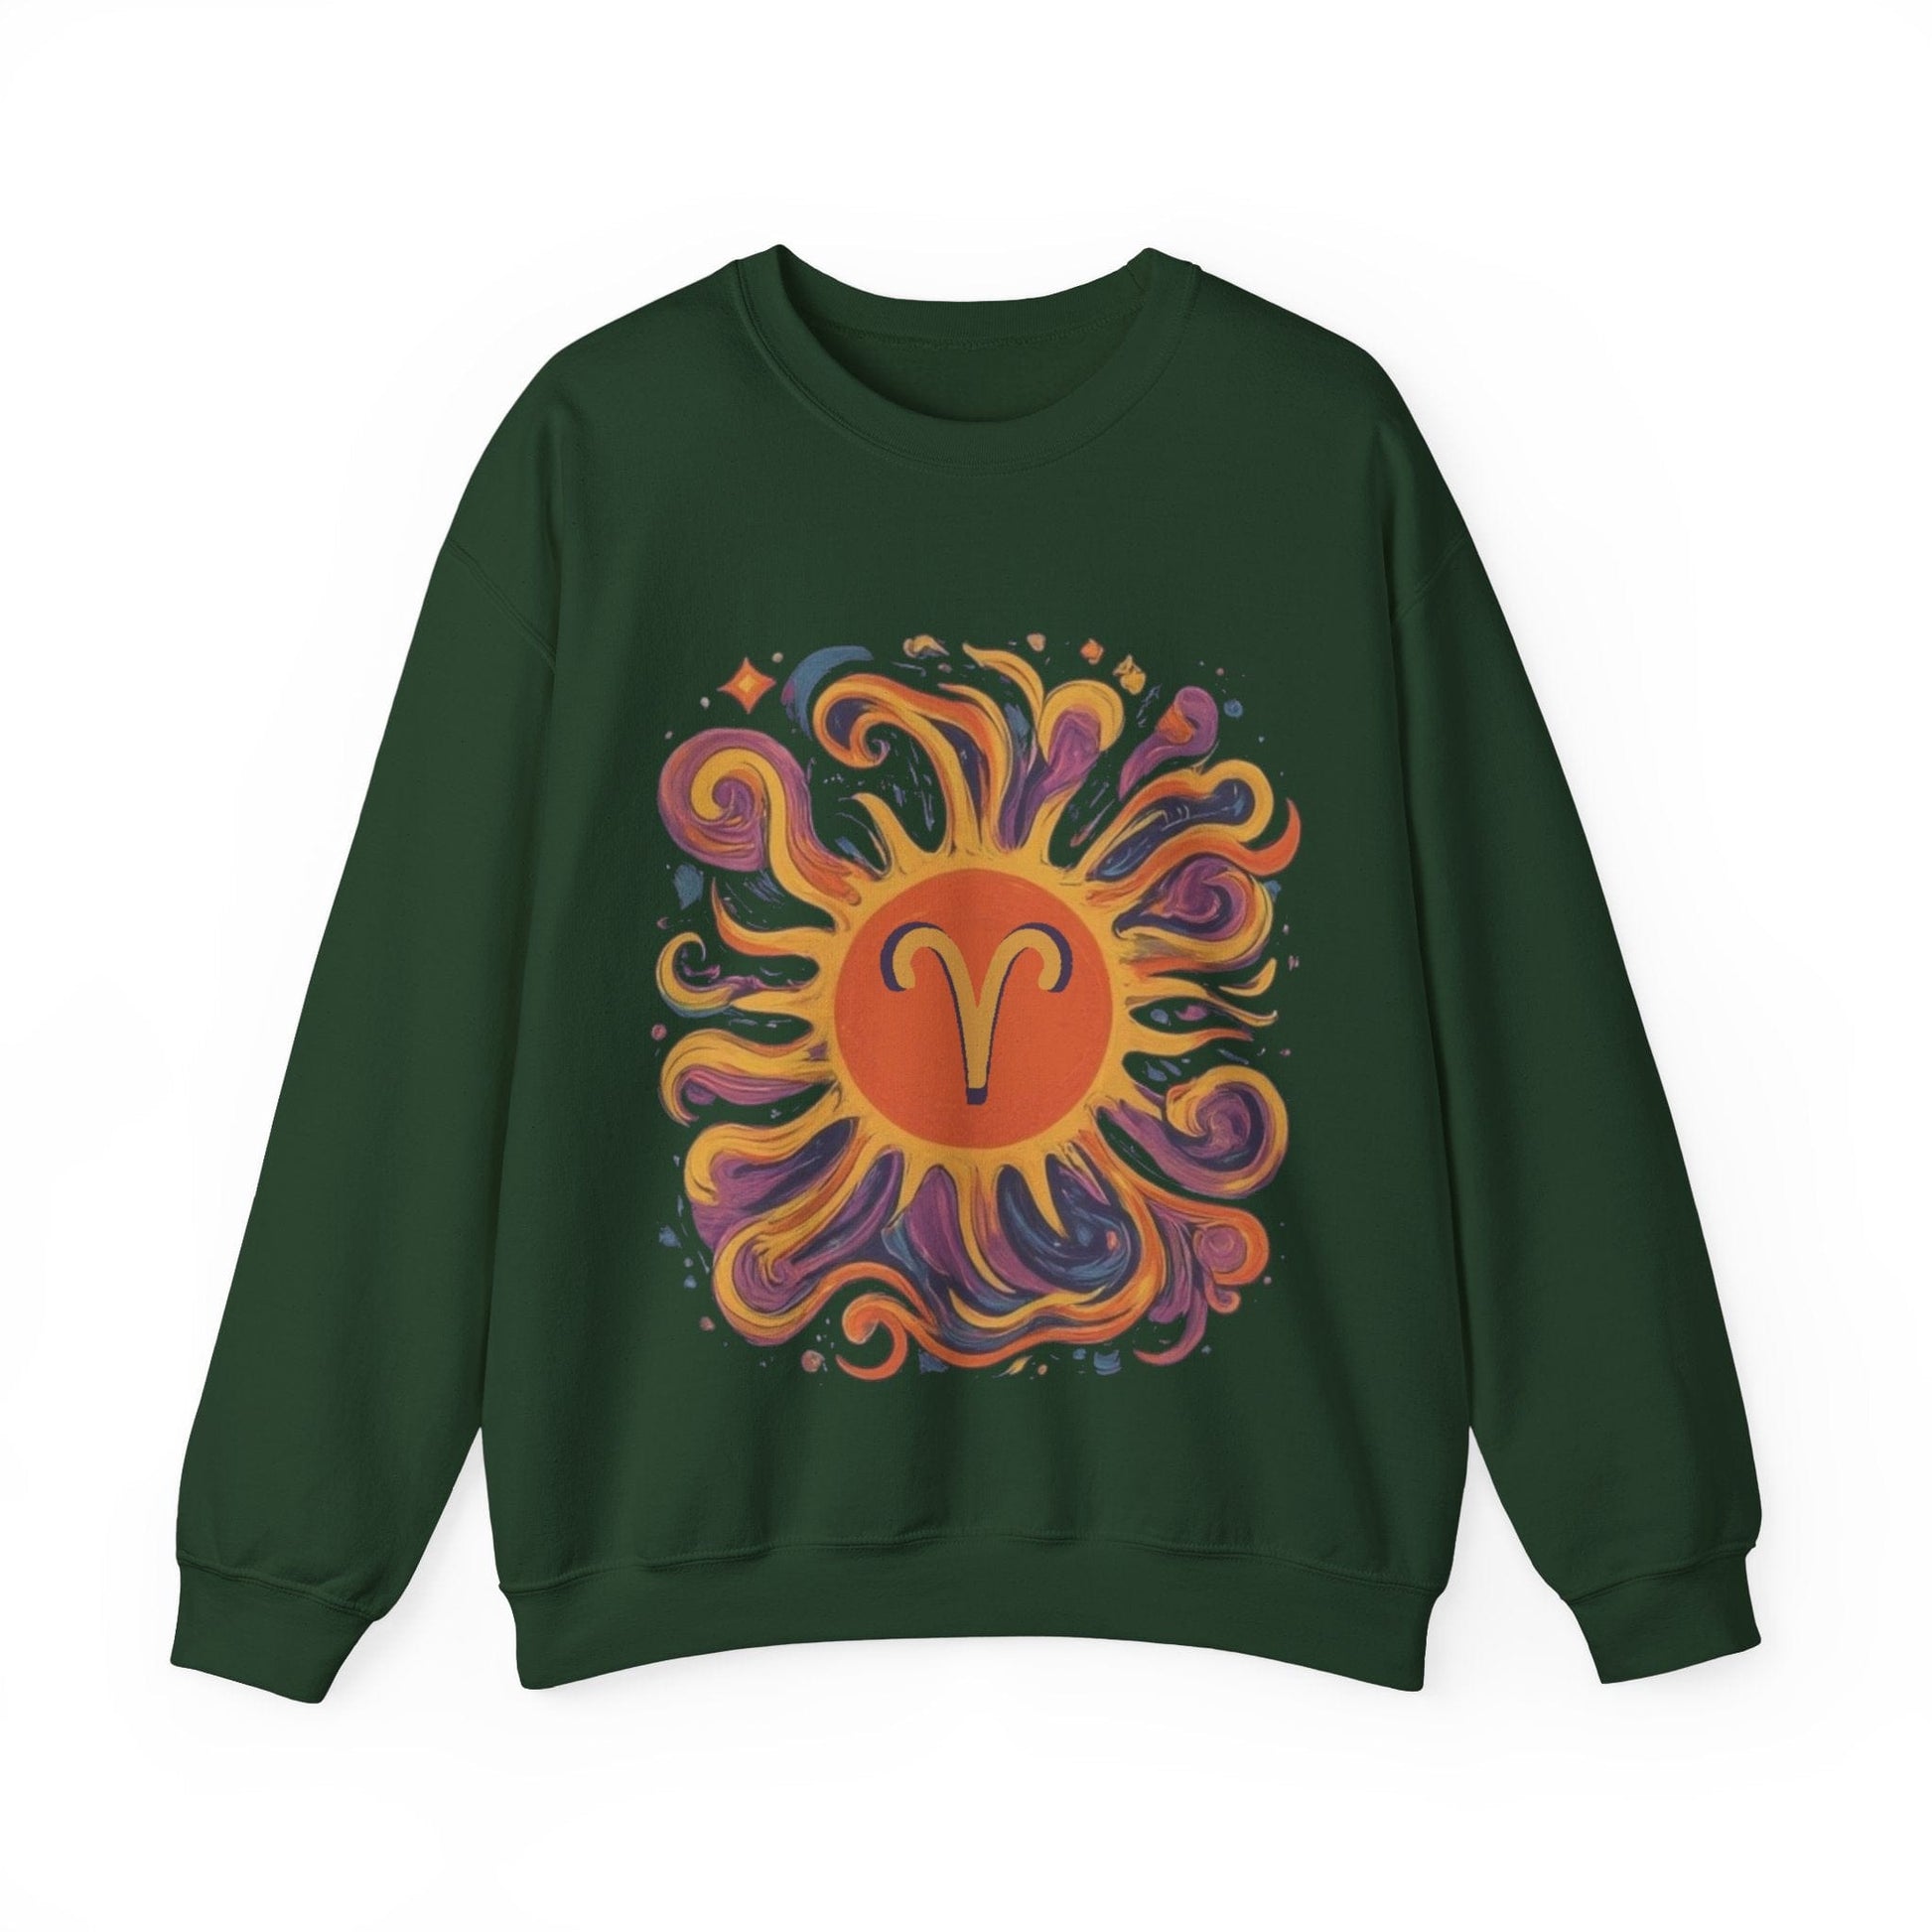 Sweatshirt S / Forest Green Aries Energetic Swirl Soft Sweater: Ignite Your Cozy Side